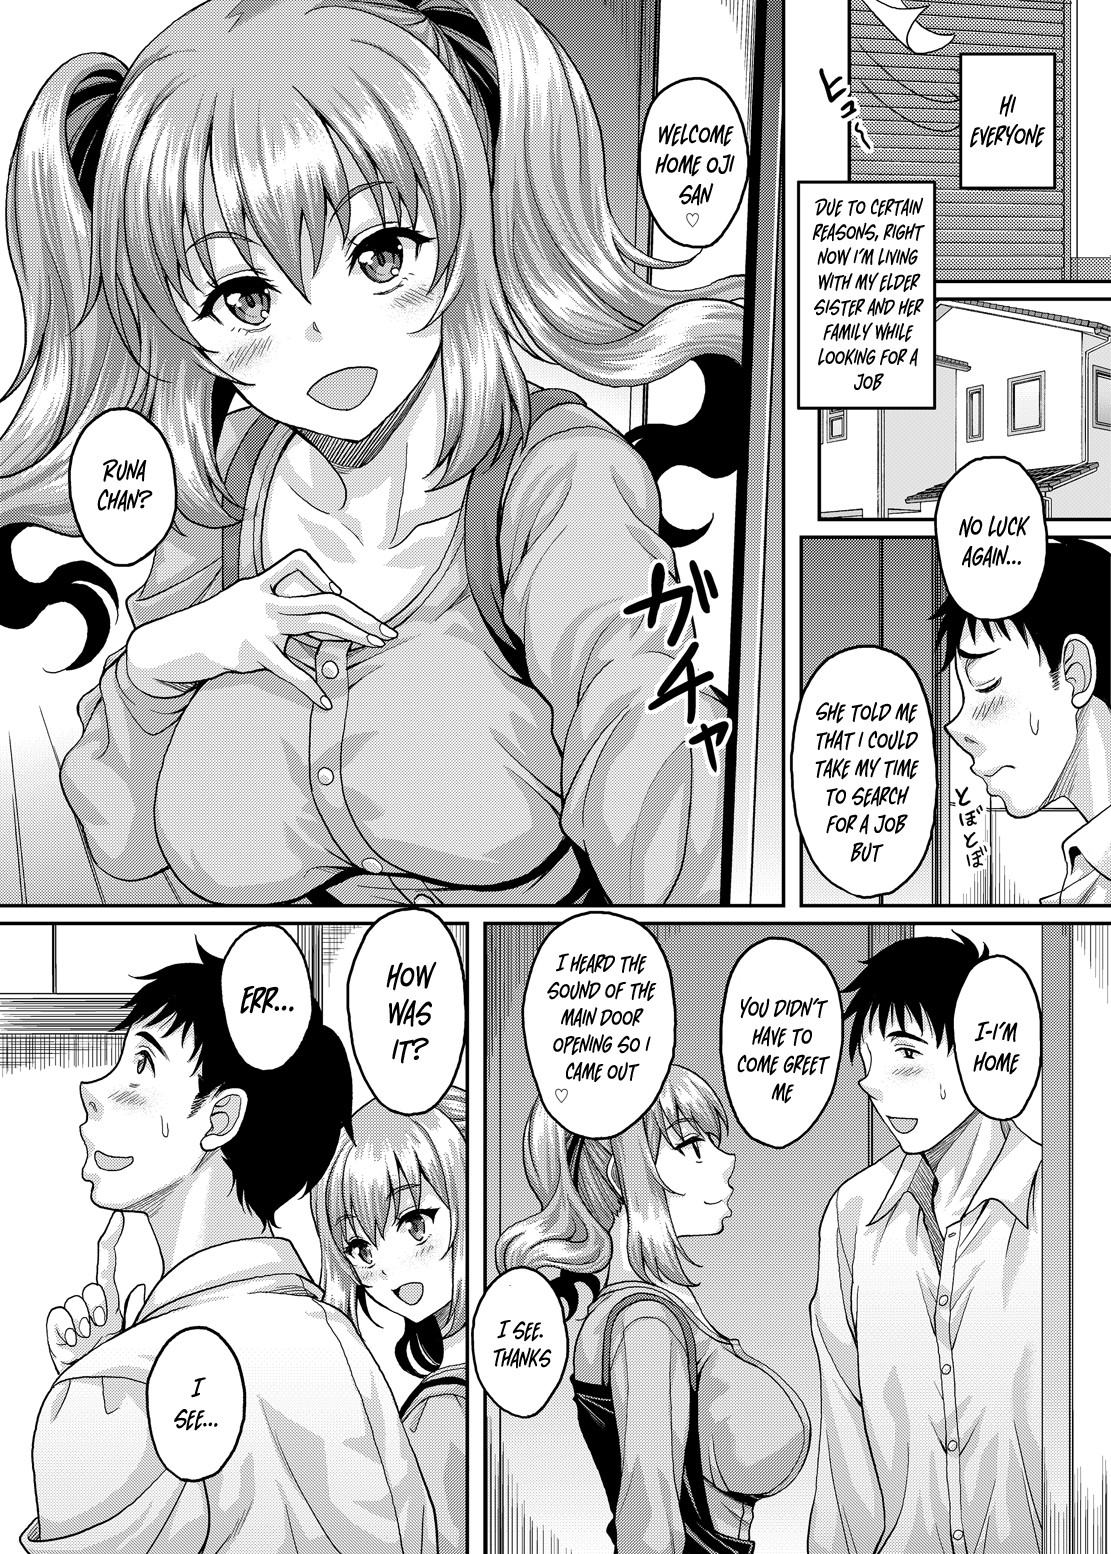 Hentai Manga Comic-Is There Really a Big Breasted Woman With a Face Like a Loli Who's Whoring Herself Out?-Read-2